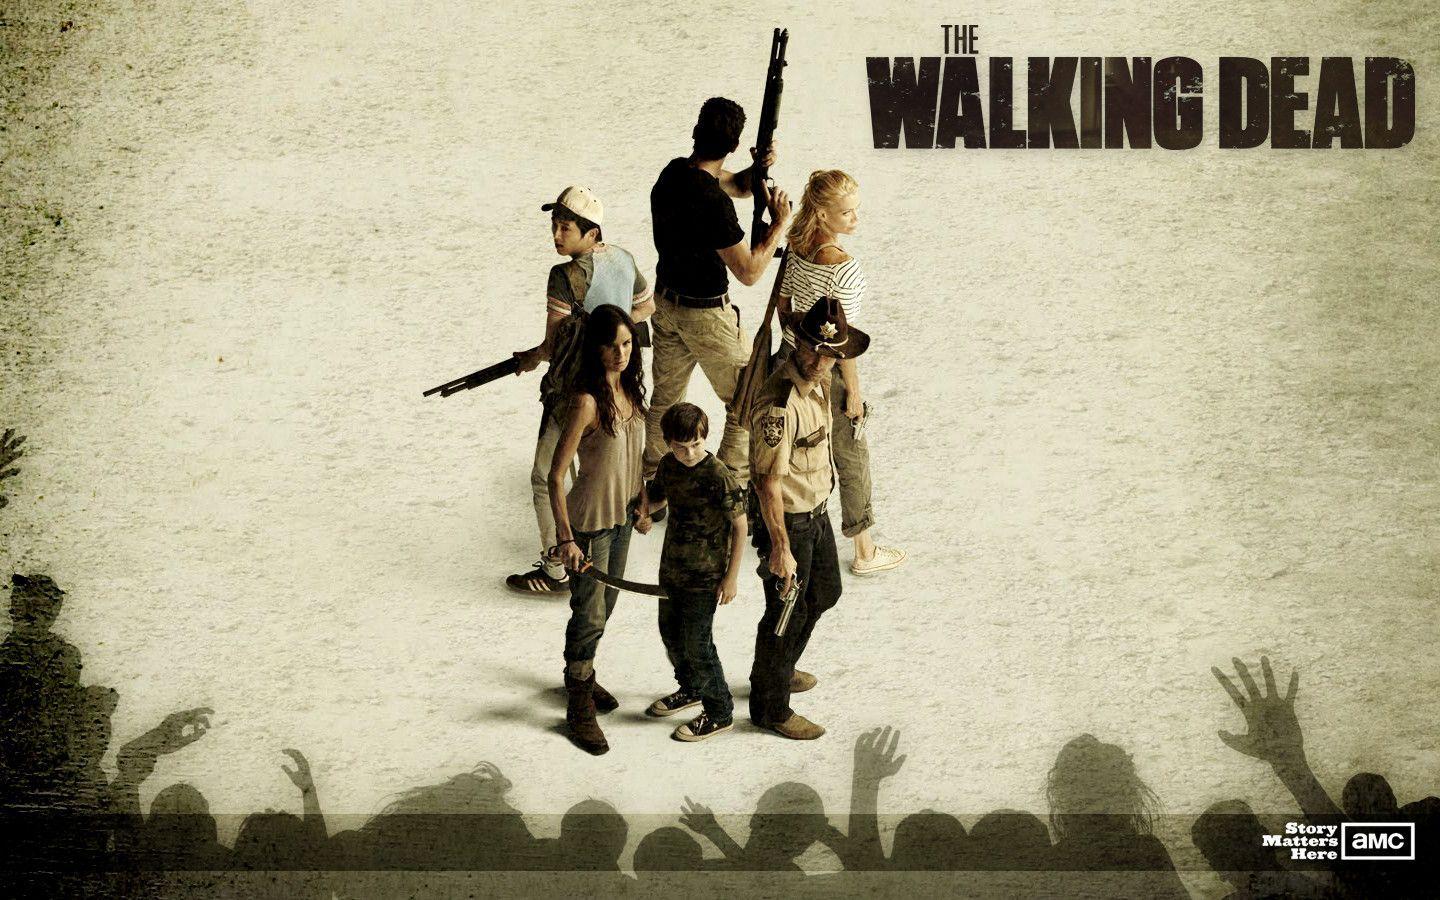 The Walking Dead Wallpaper HD 24. Mzsunflower&;s Sunny Funny Thoughts